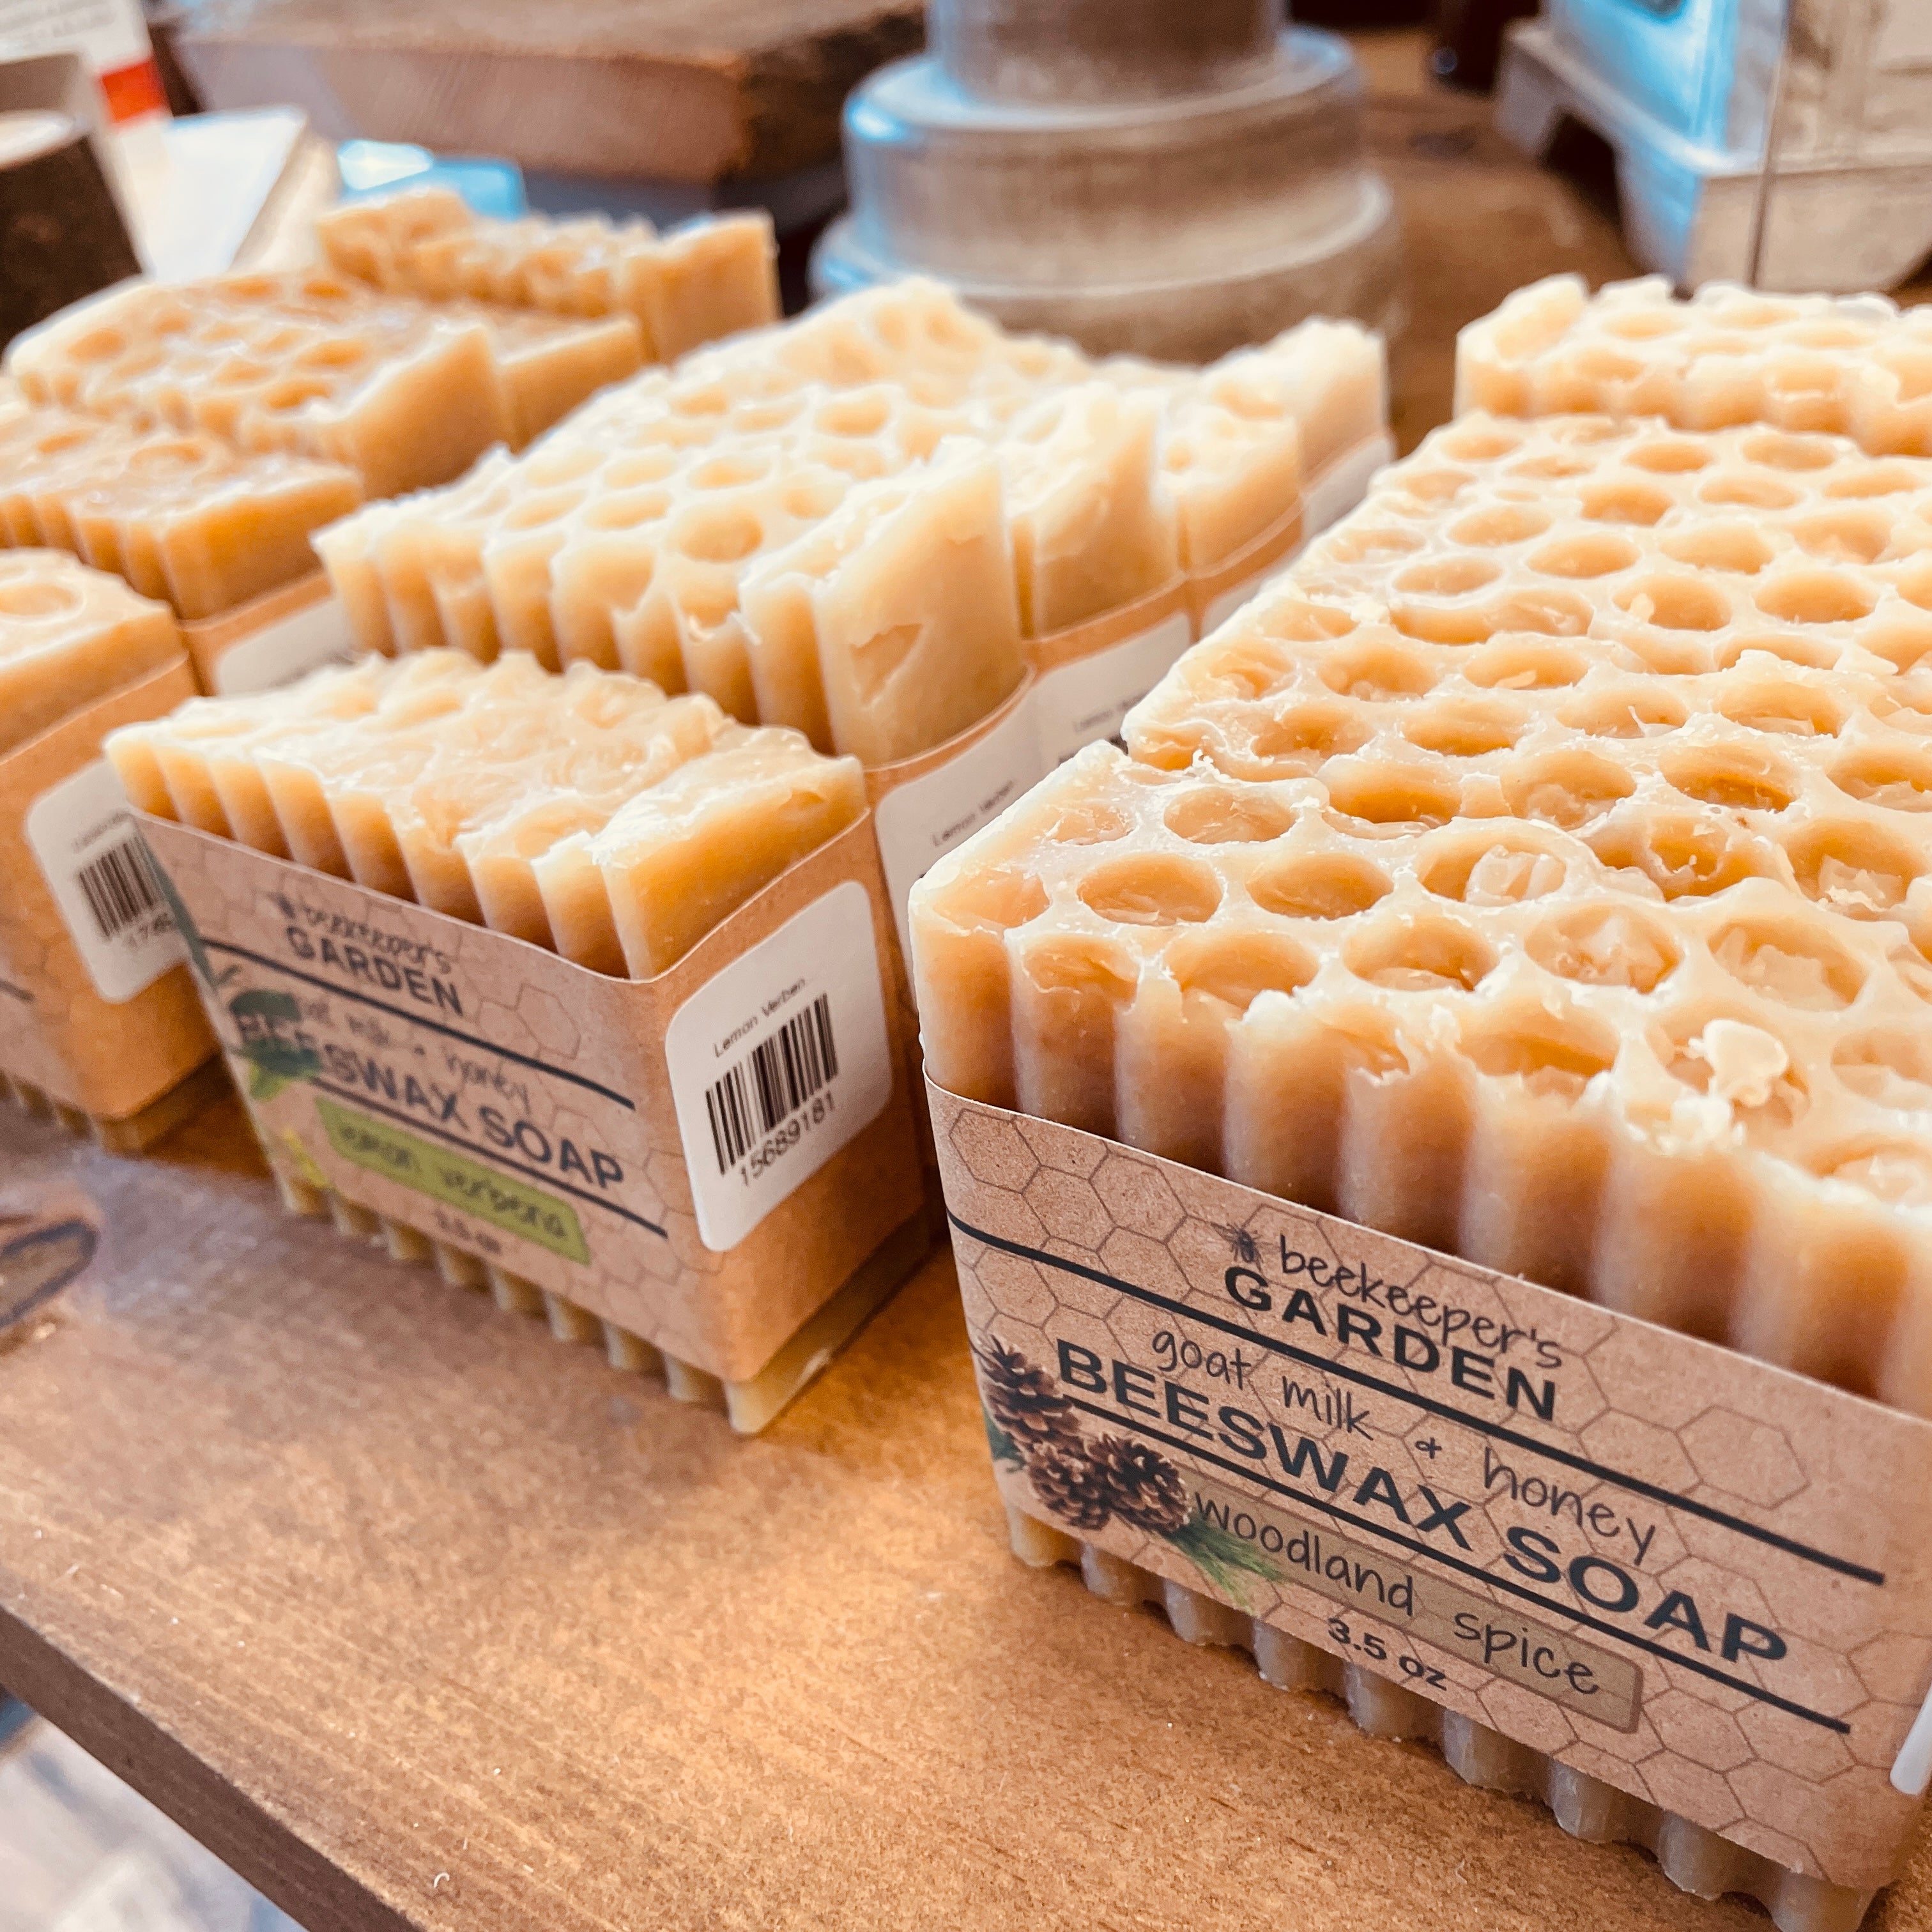 Woodland Spice Beeswax Soap